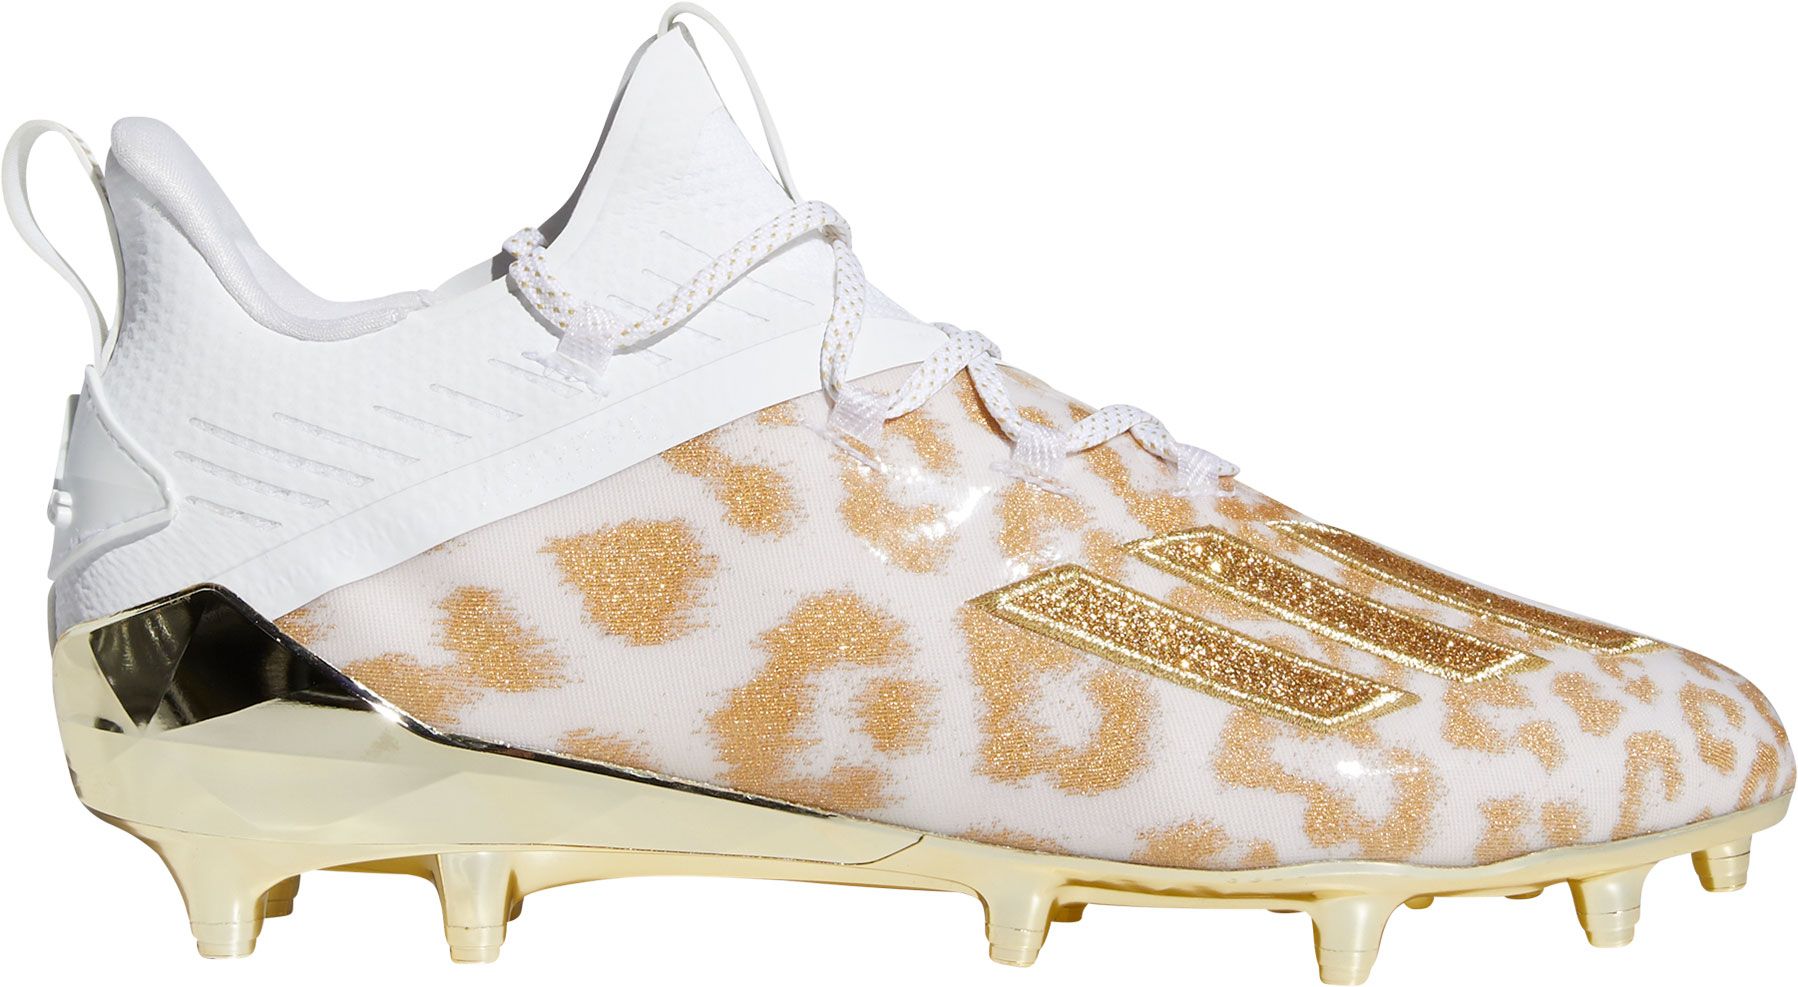 nike football cleats white and gold